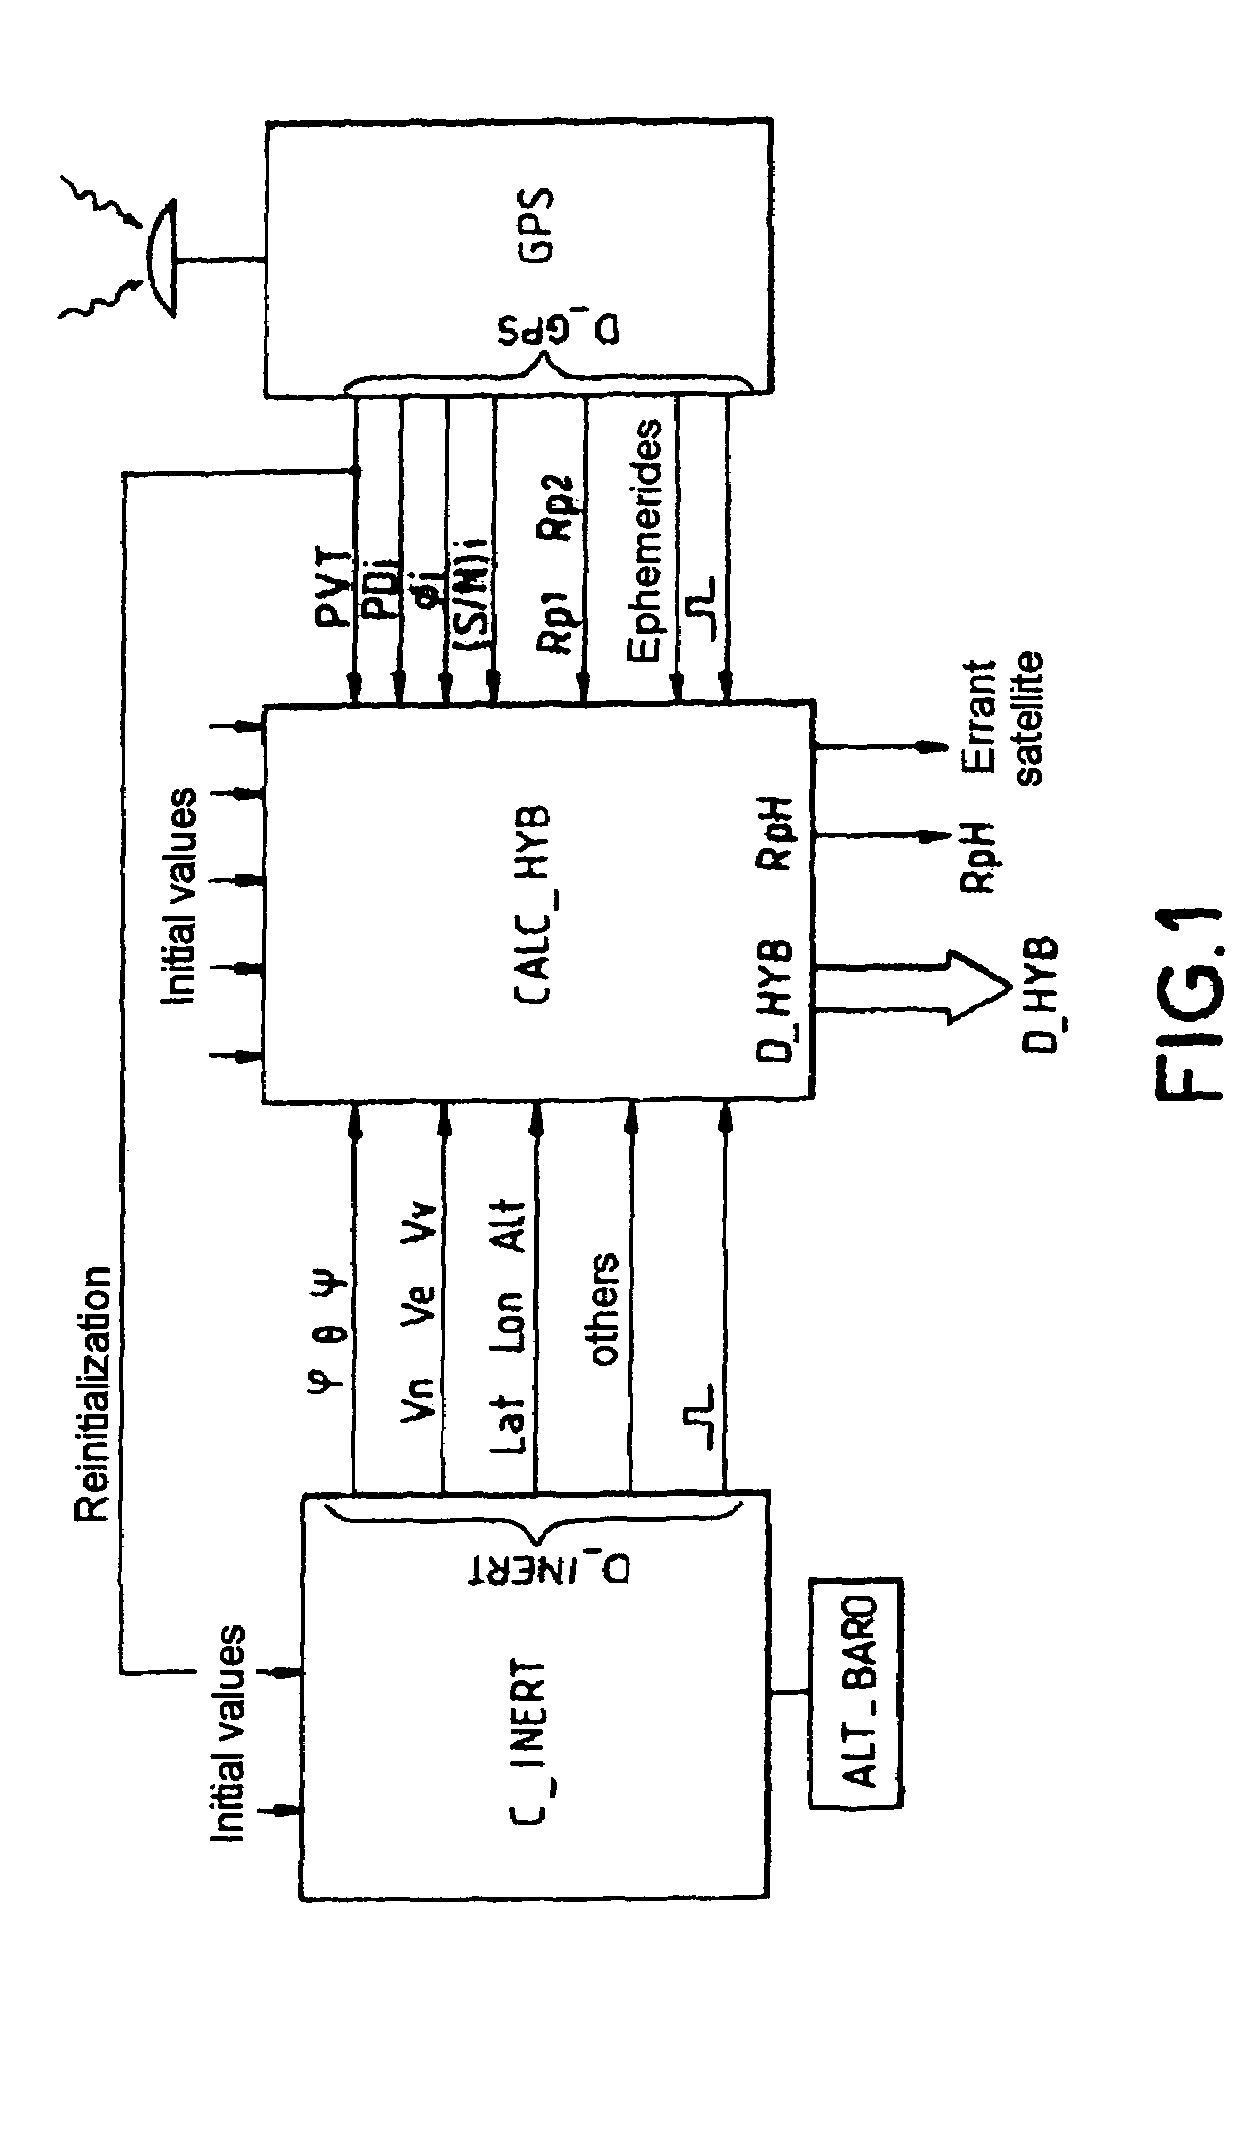 Hybrid inertial navigation system with improved integrity